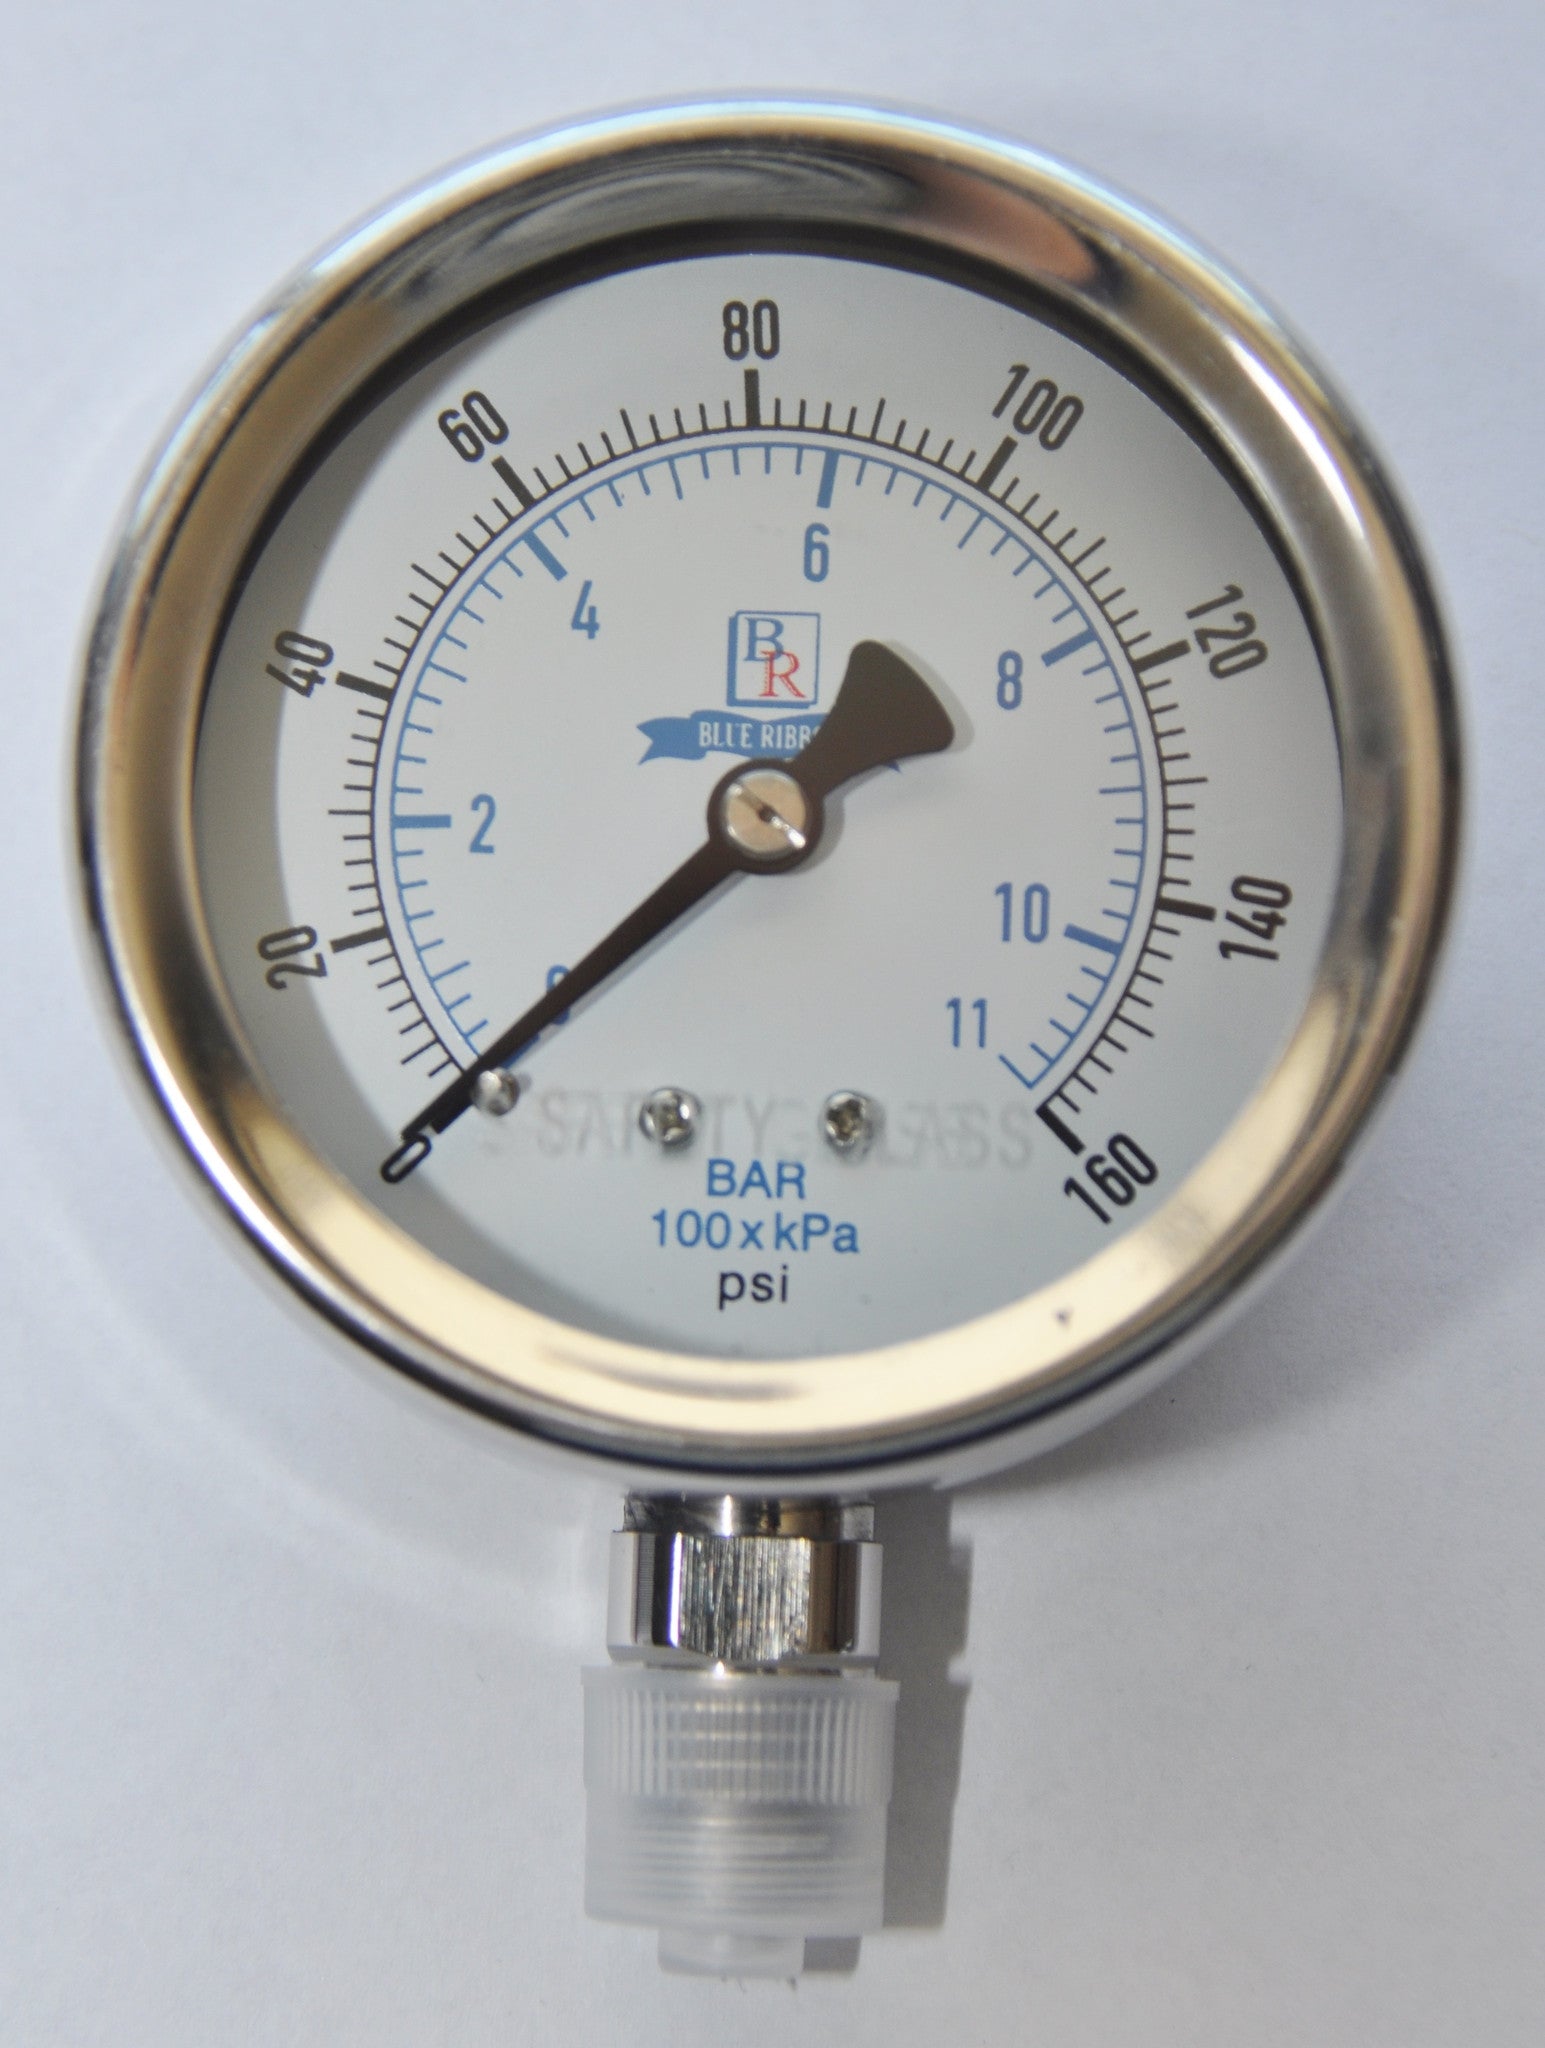 Model BRHW Hot Water Thermometer - Blue Ribbon Corp